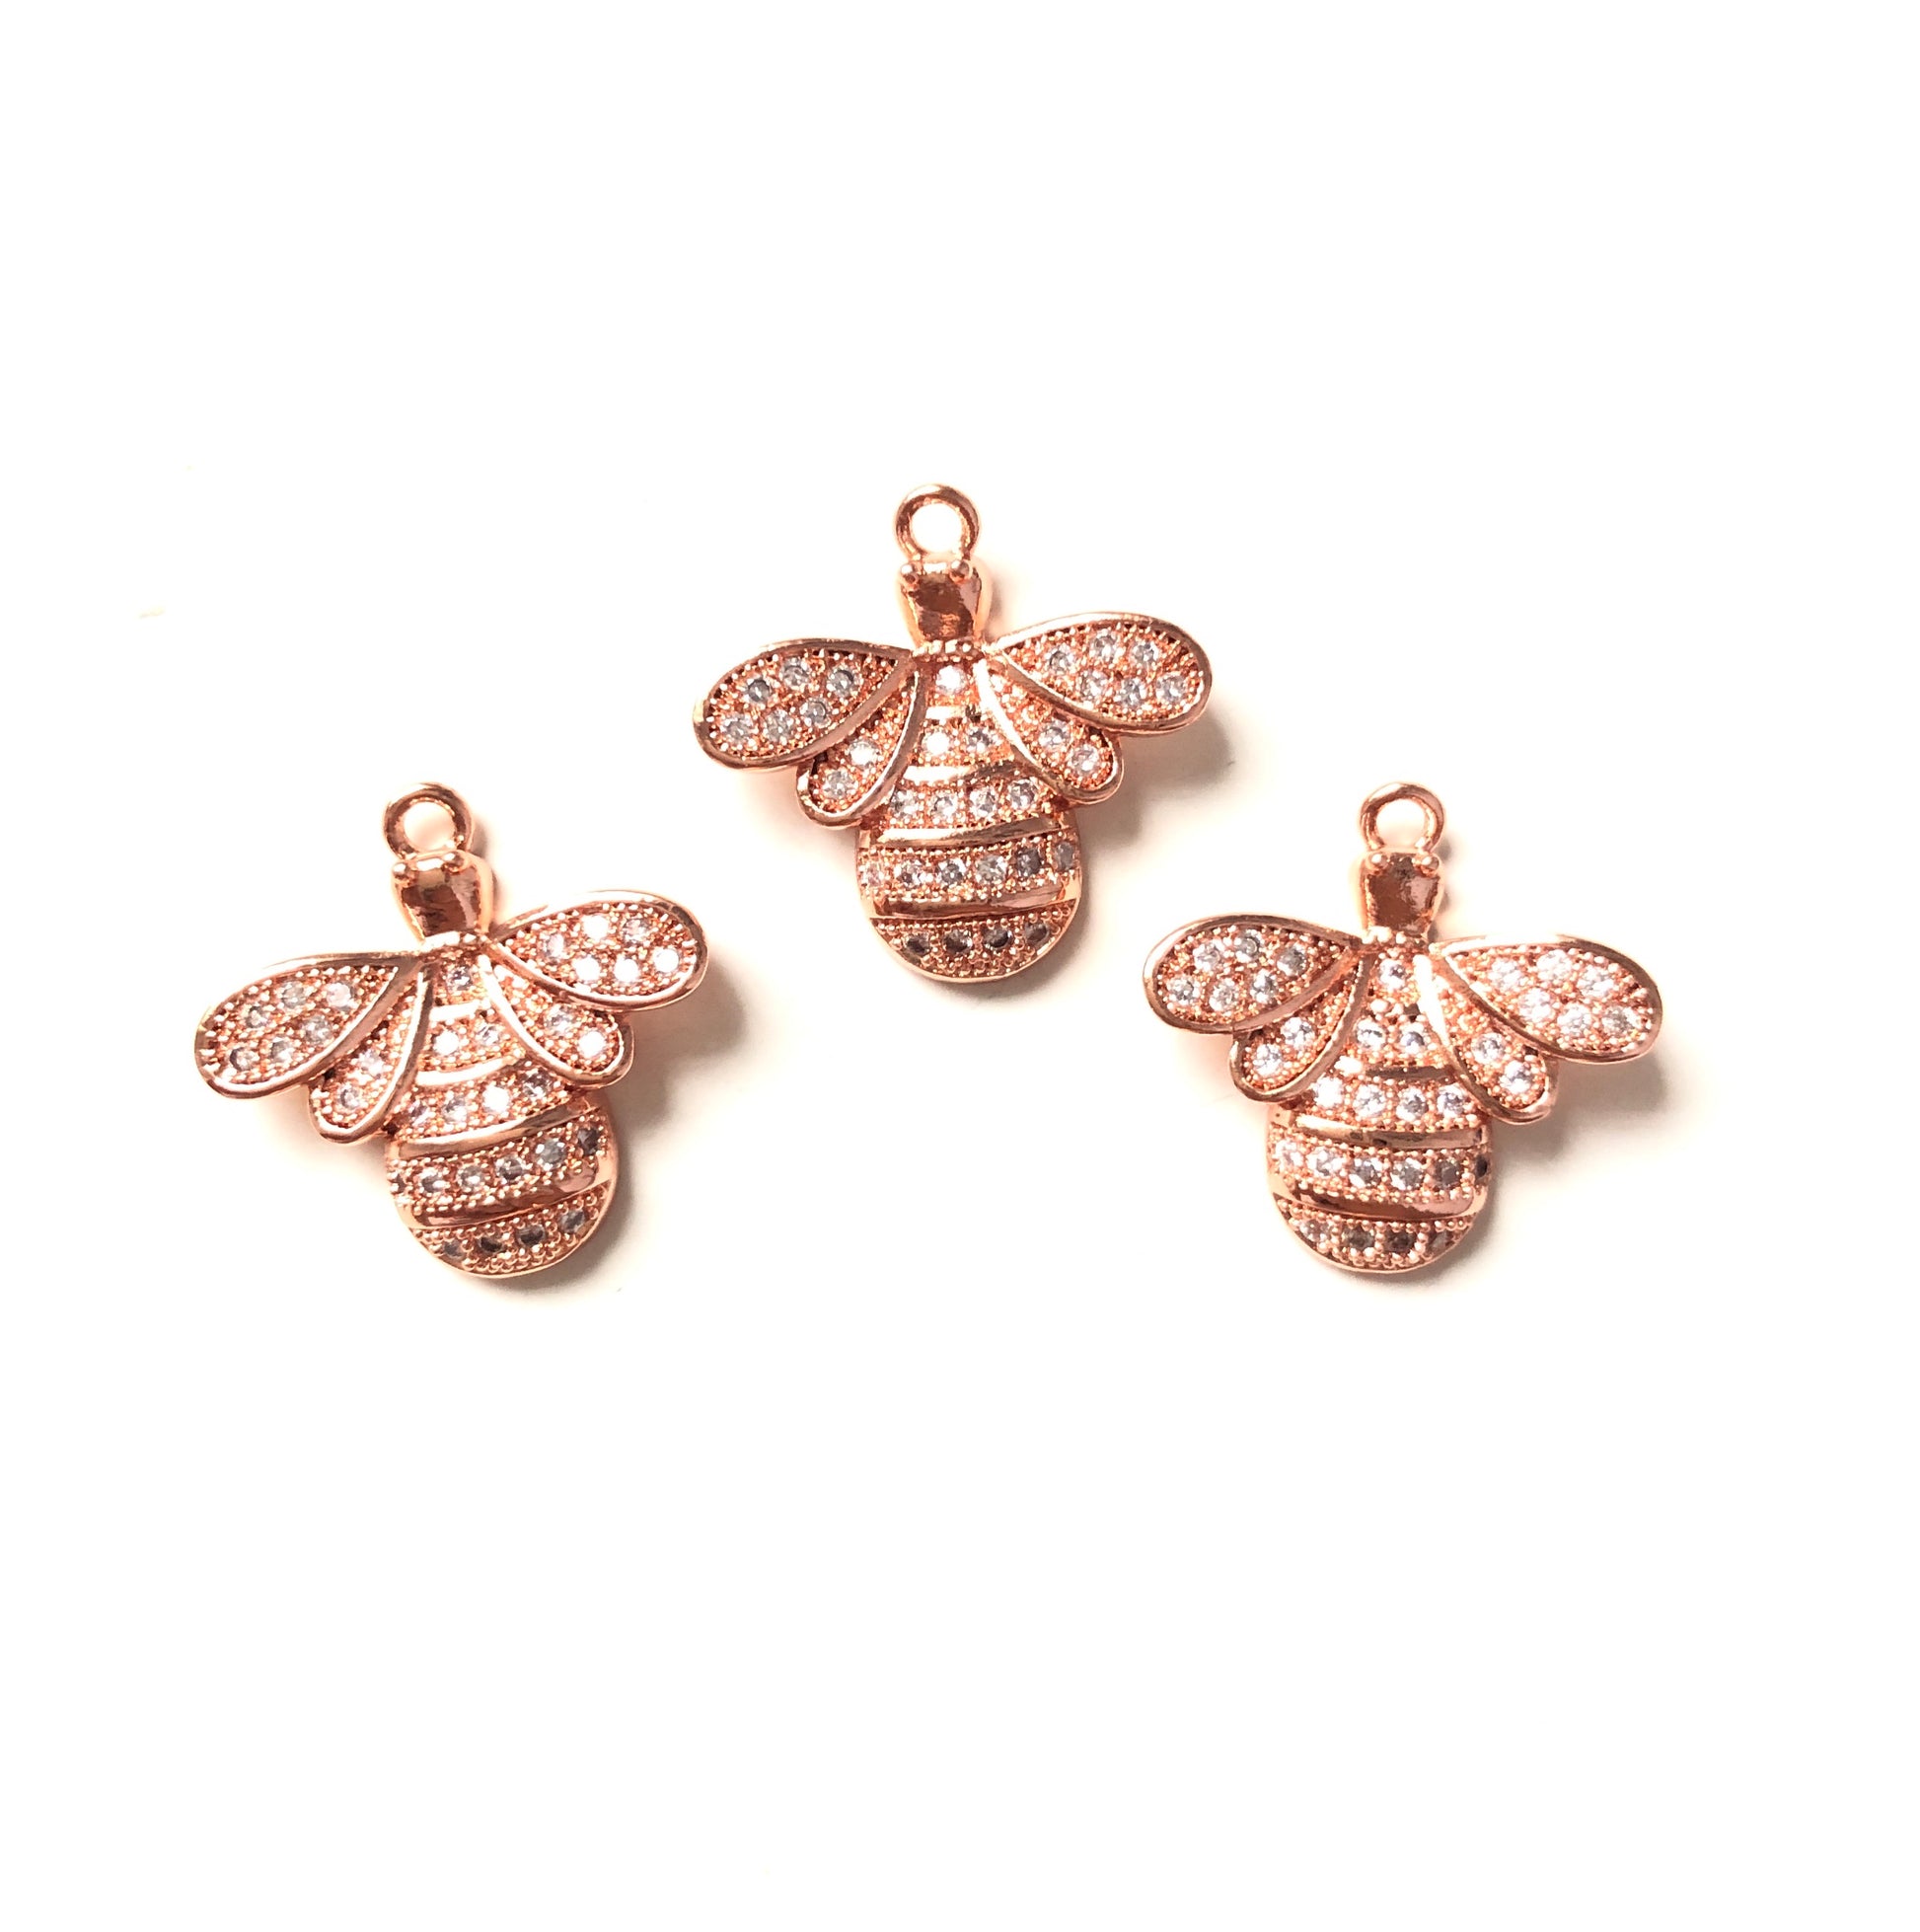 10pcs/lot 17*17mm CZ Paved Small Bee Charms Rose Gold CZ Paved Charms Animals & Insects Charms Beads Beyond